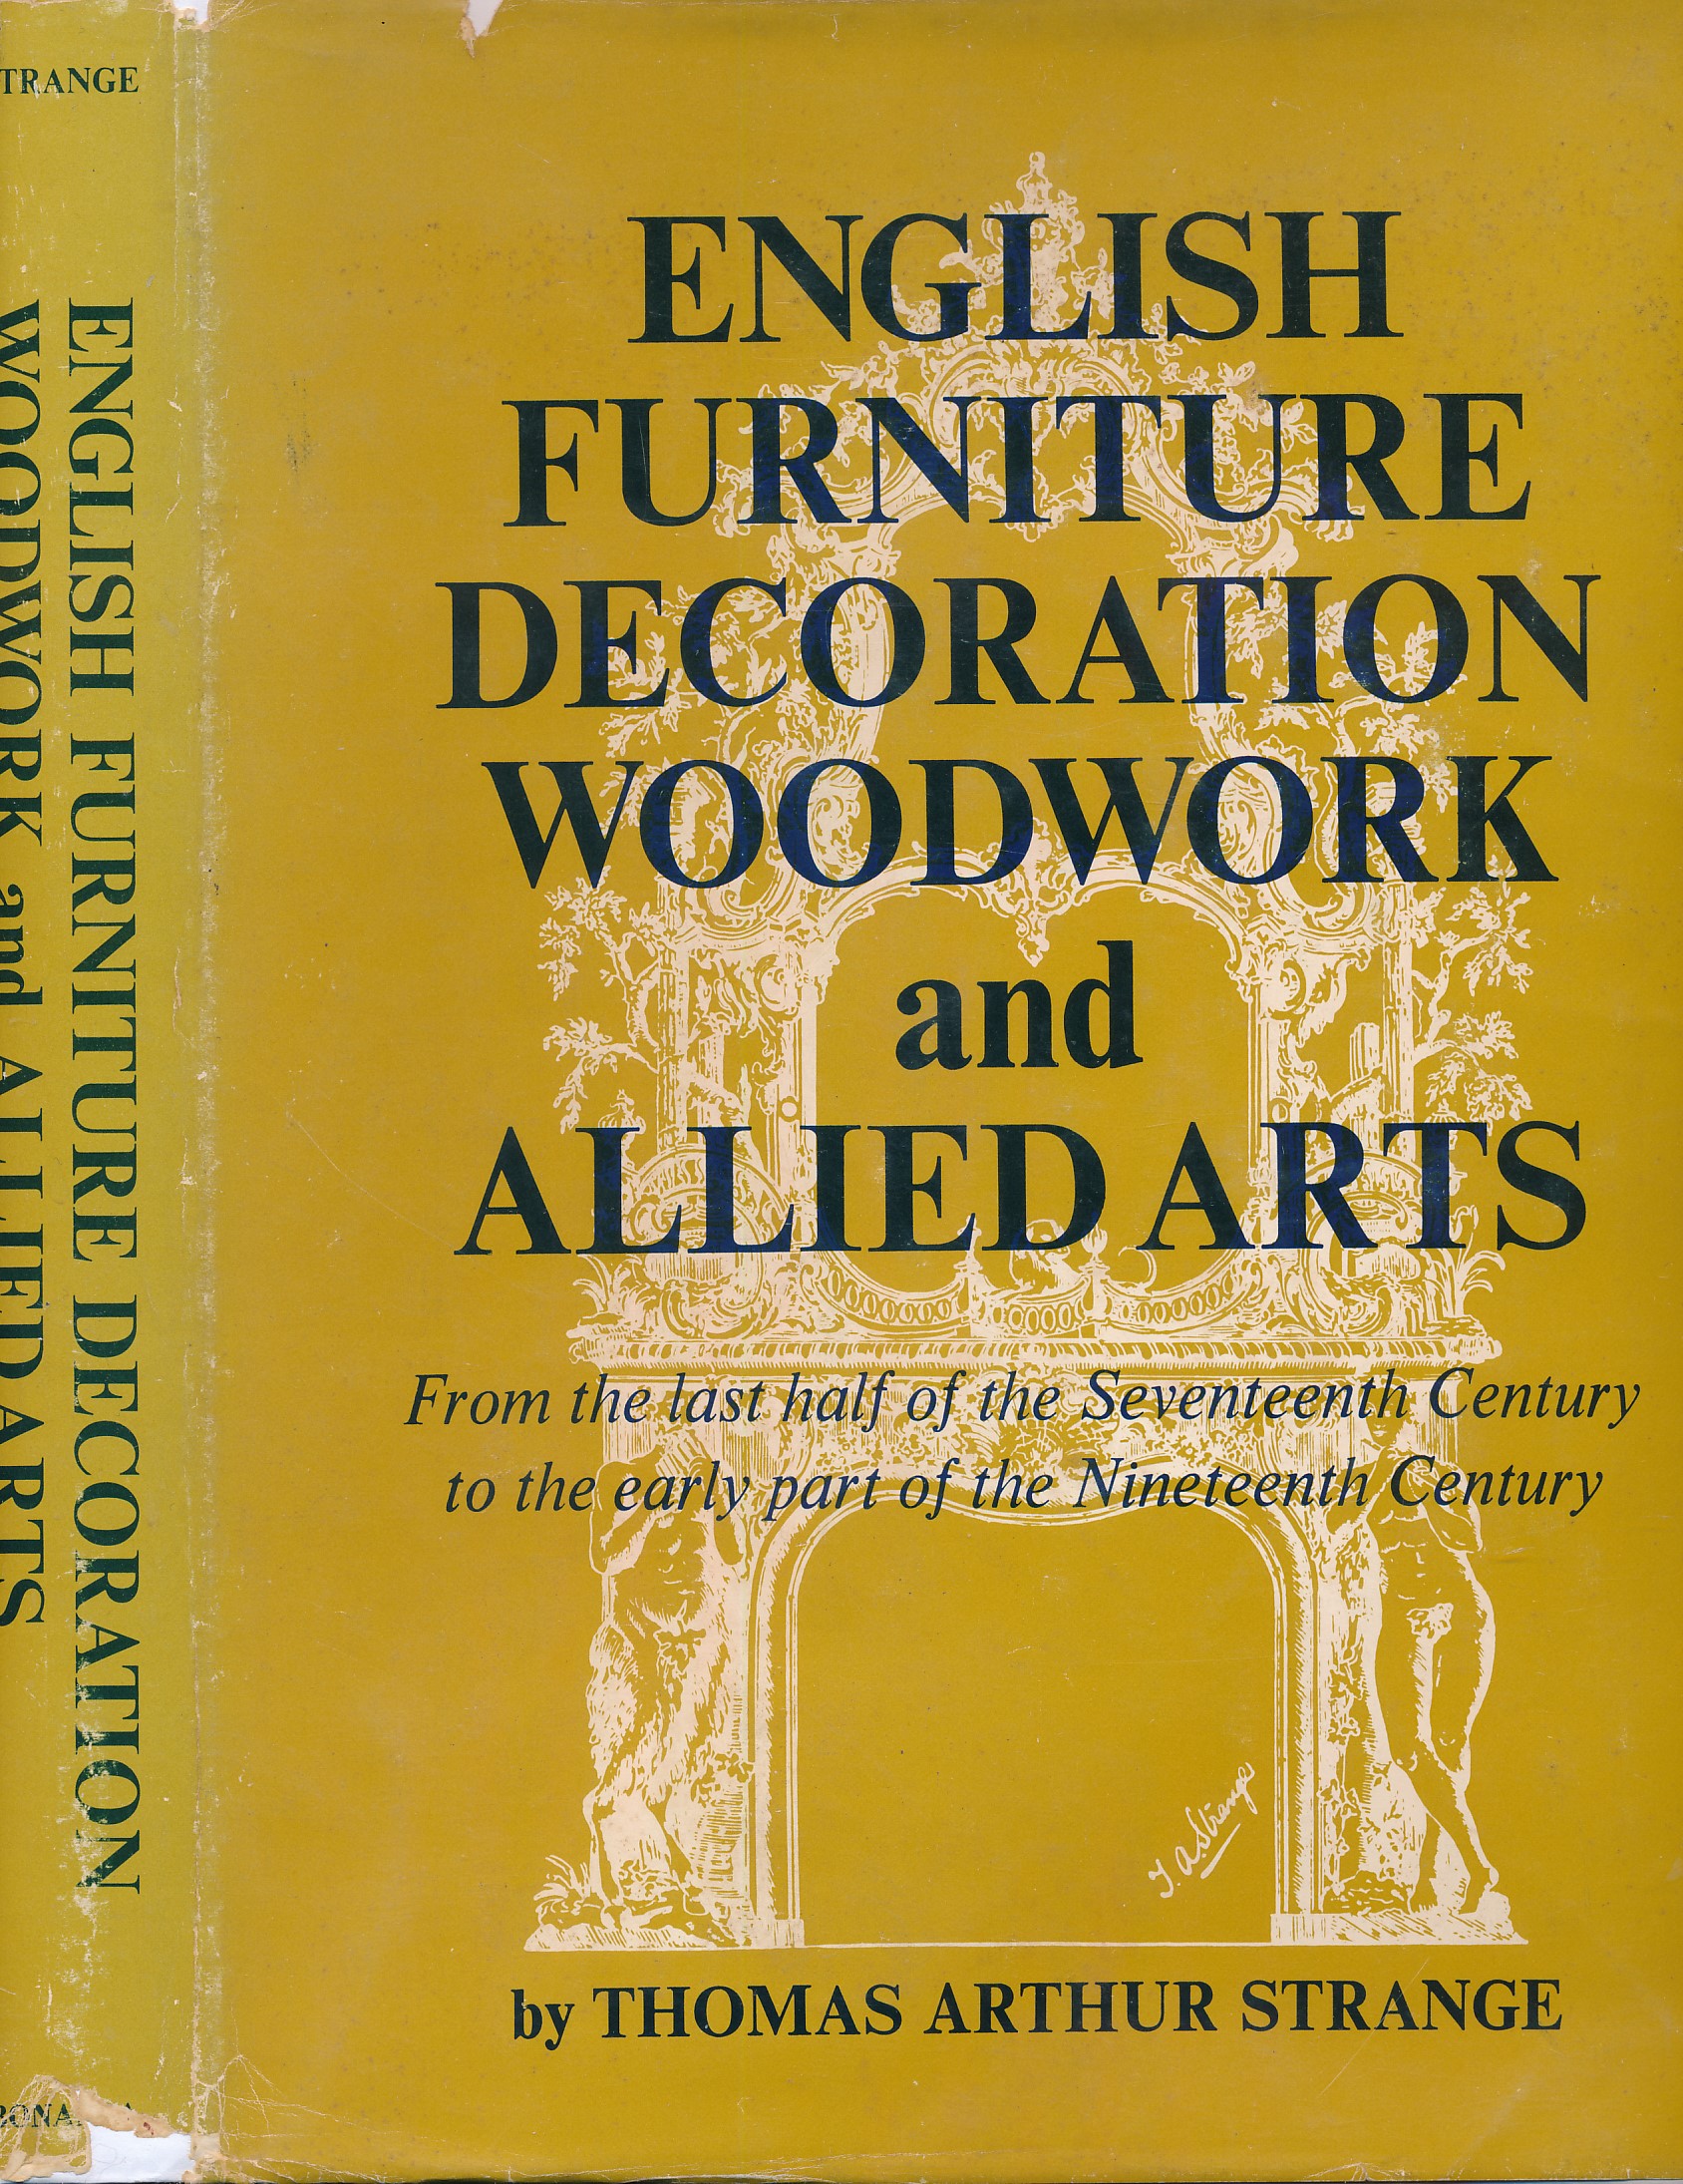 English Furniture, Decoration, Woodwork and Allied Arts during the last half of the Seventeenth Century the whole of the Eighteenth Century and the early part of the Nineteenth Century.